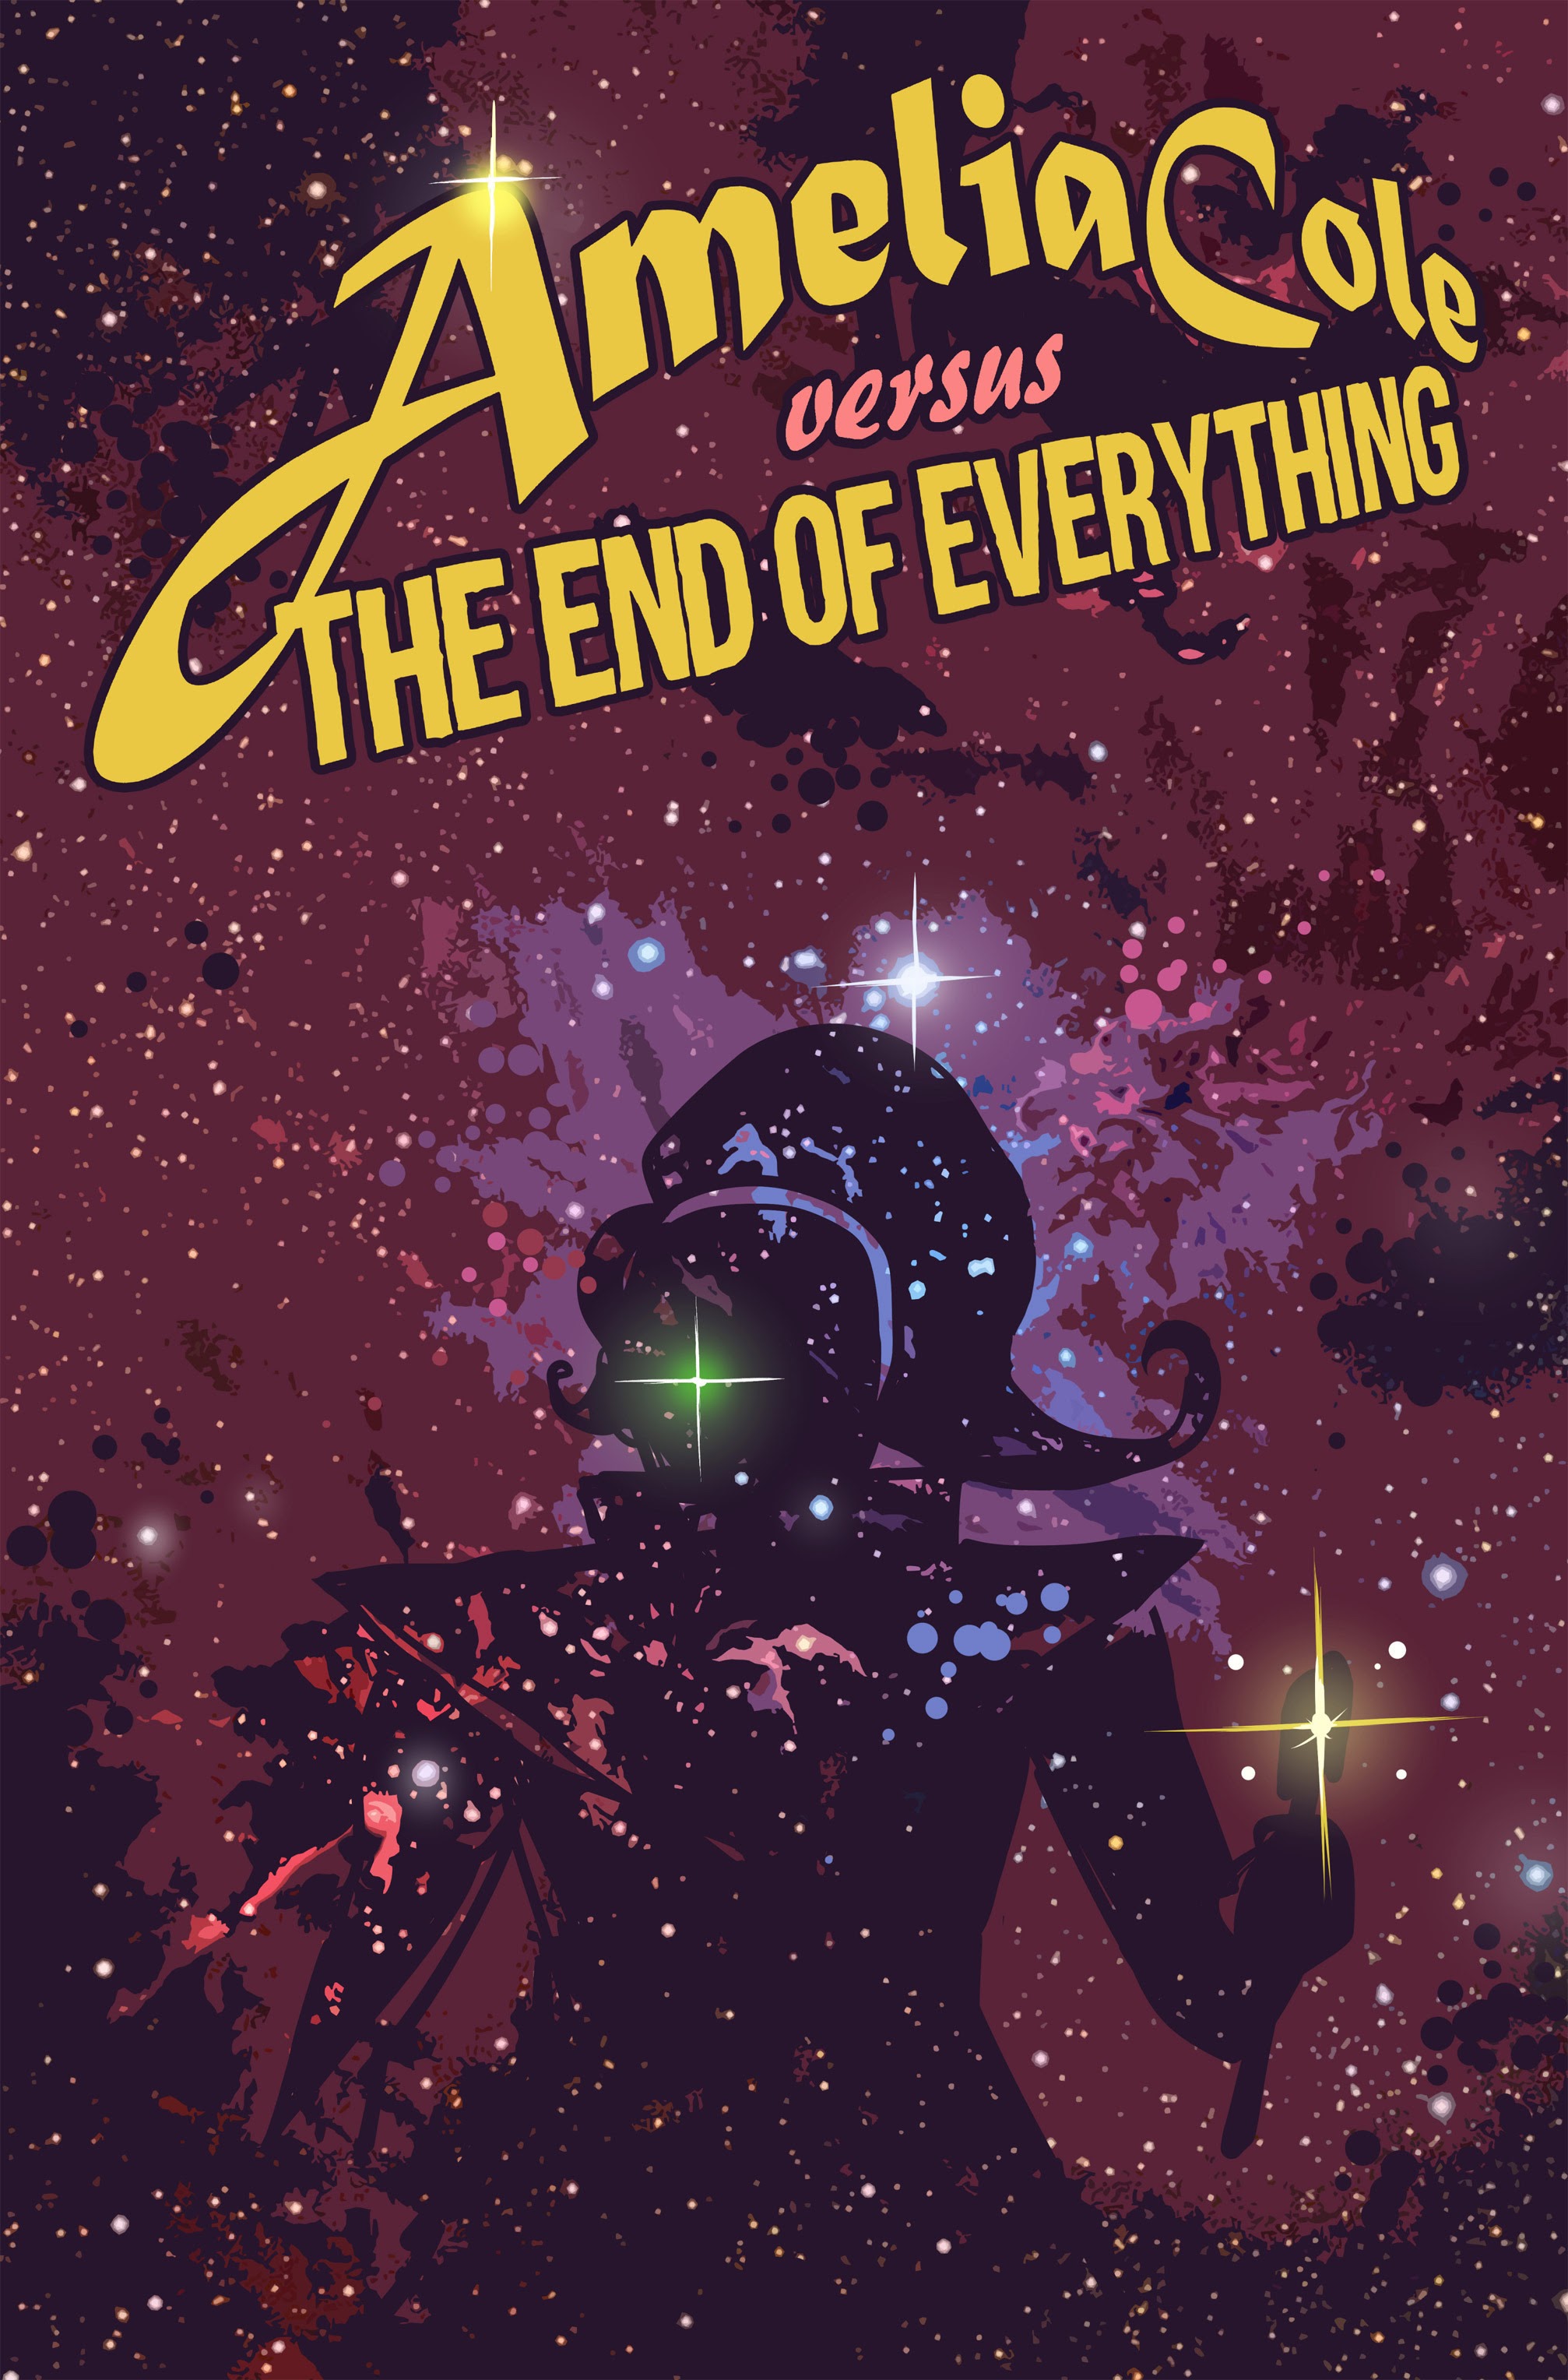 Read online Amelia Cole Versus The End of Everything comic -  Issue #25 - 1